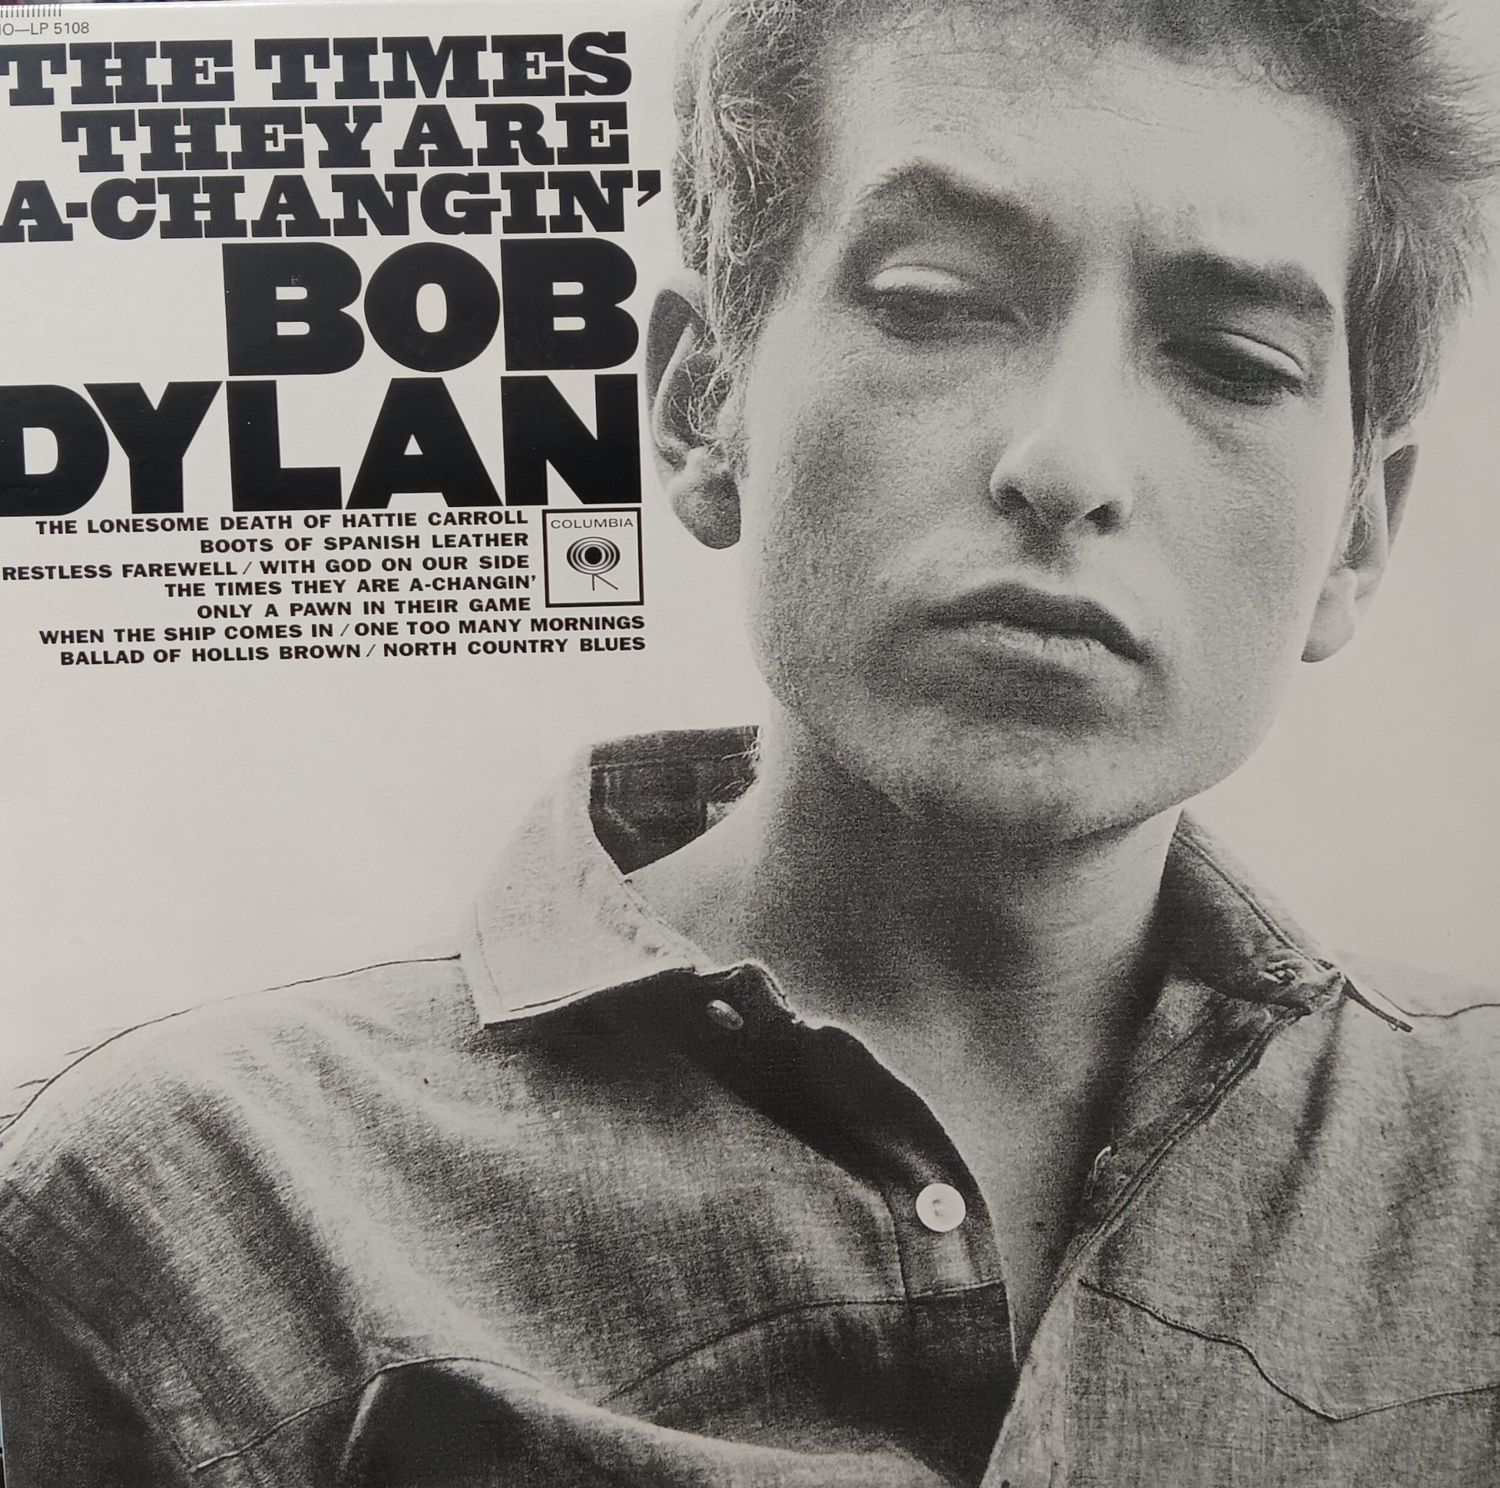 BOB DYLAN - The Times They Are A-changin (REPRESS)